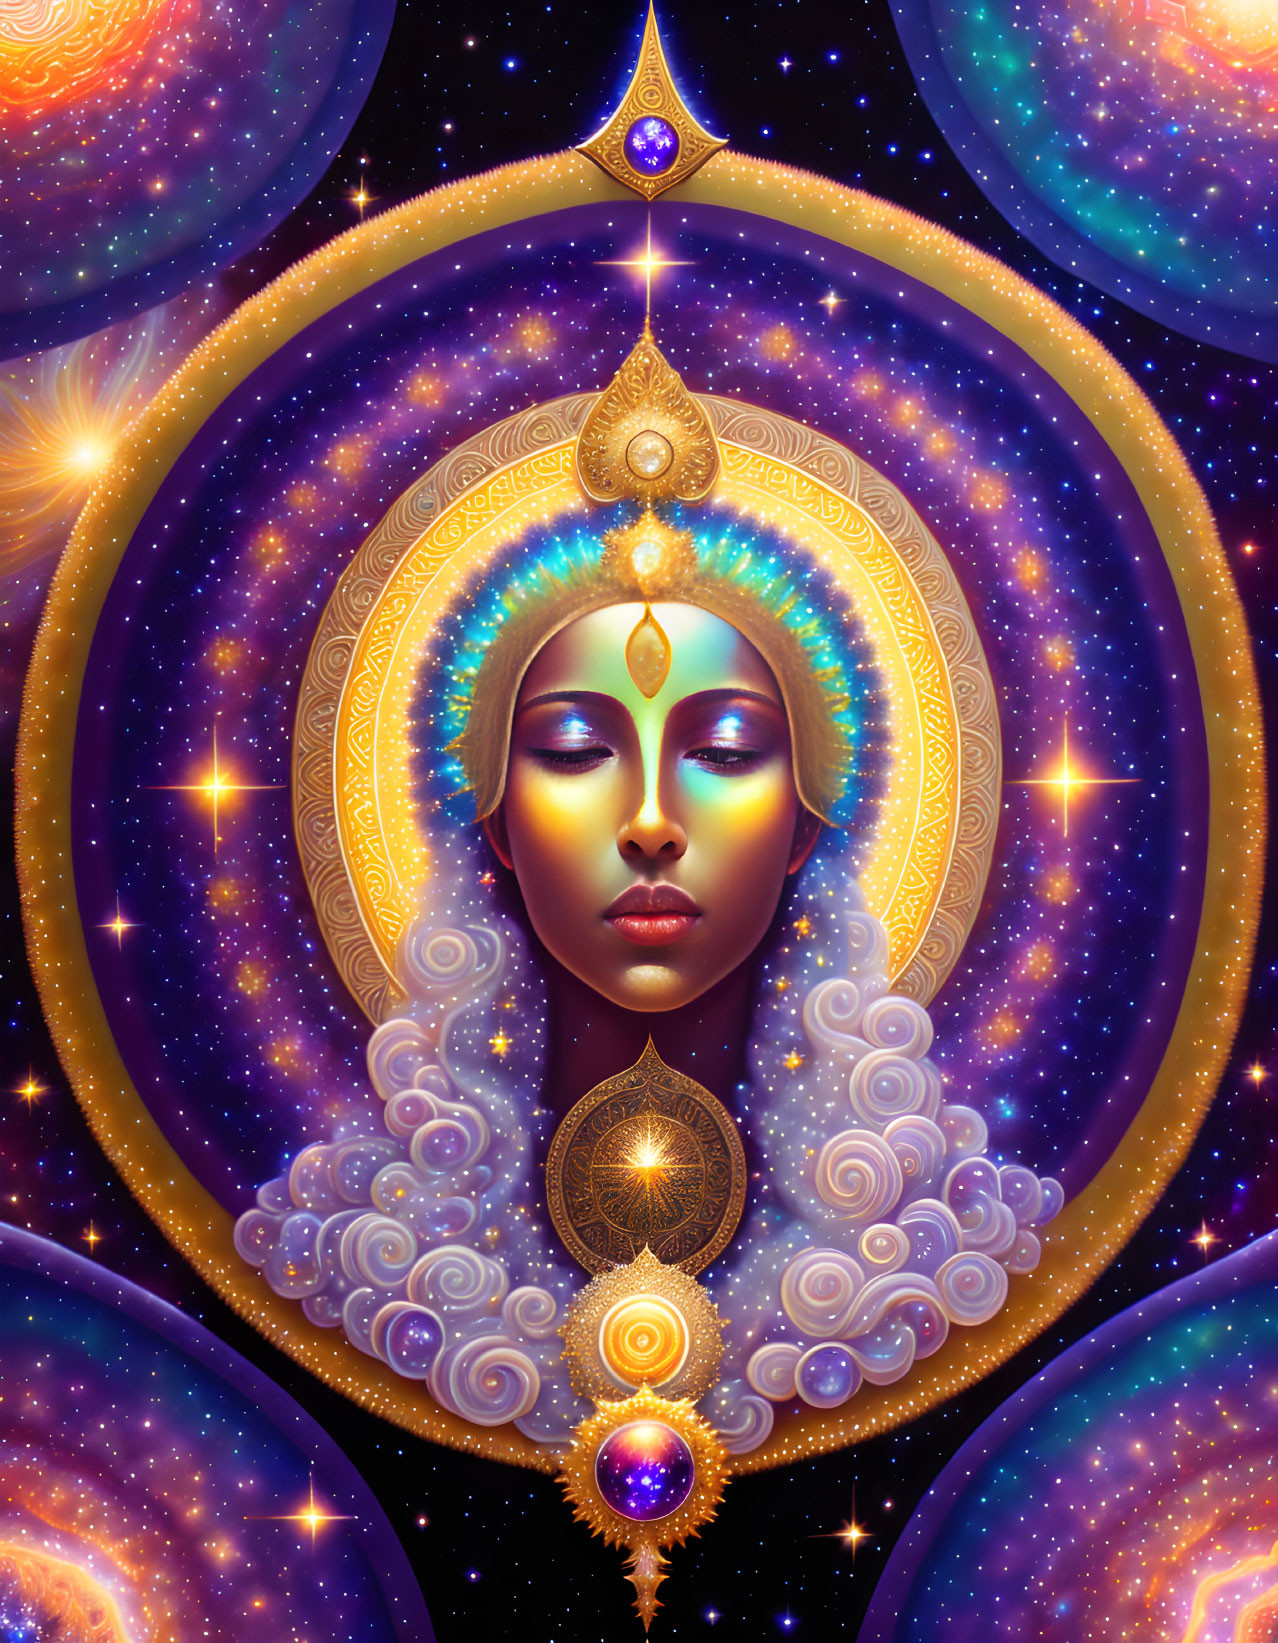 Celestial-themed illustration of serene face with cosmic ornaments and stars.